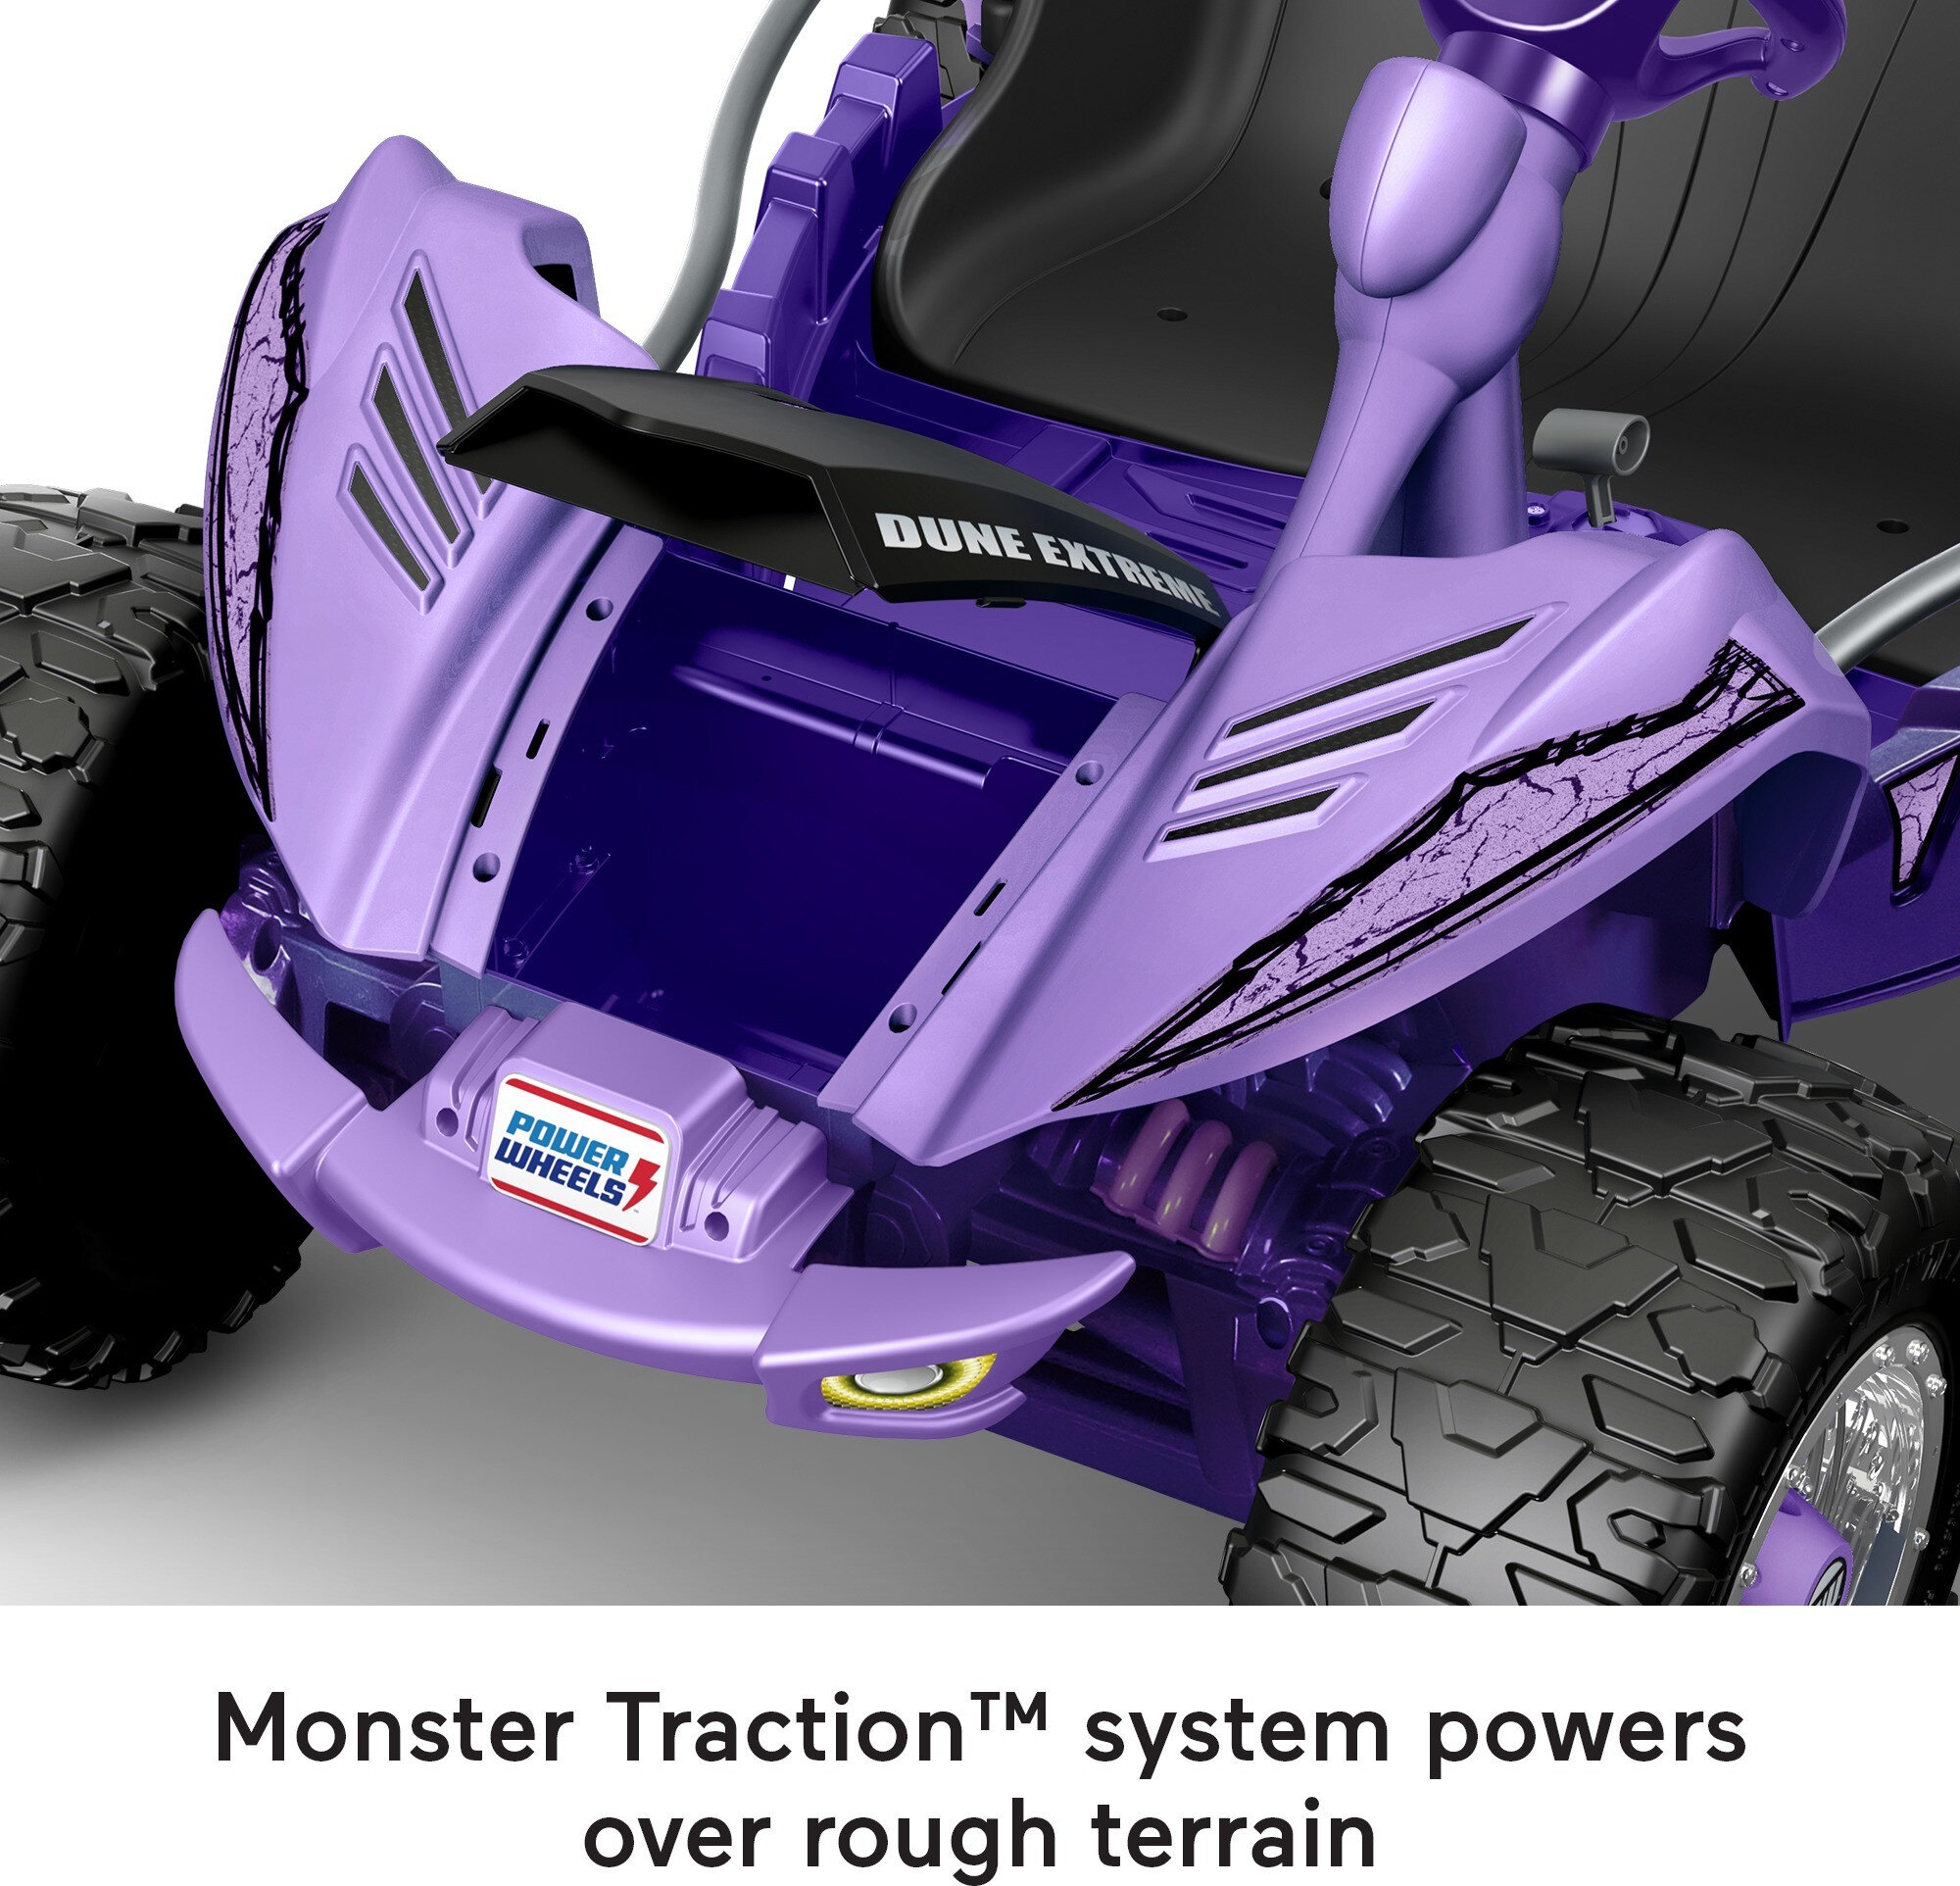 12V Power Wheels Dune Racer Extreme Battery-Powered Ride-on, Purple, for a Child Ages 3-7 - image 5 of 6